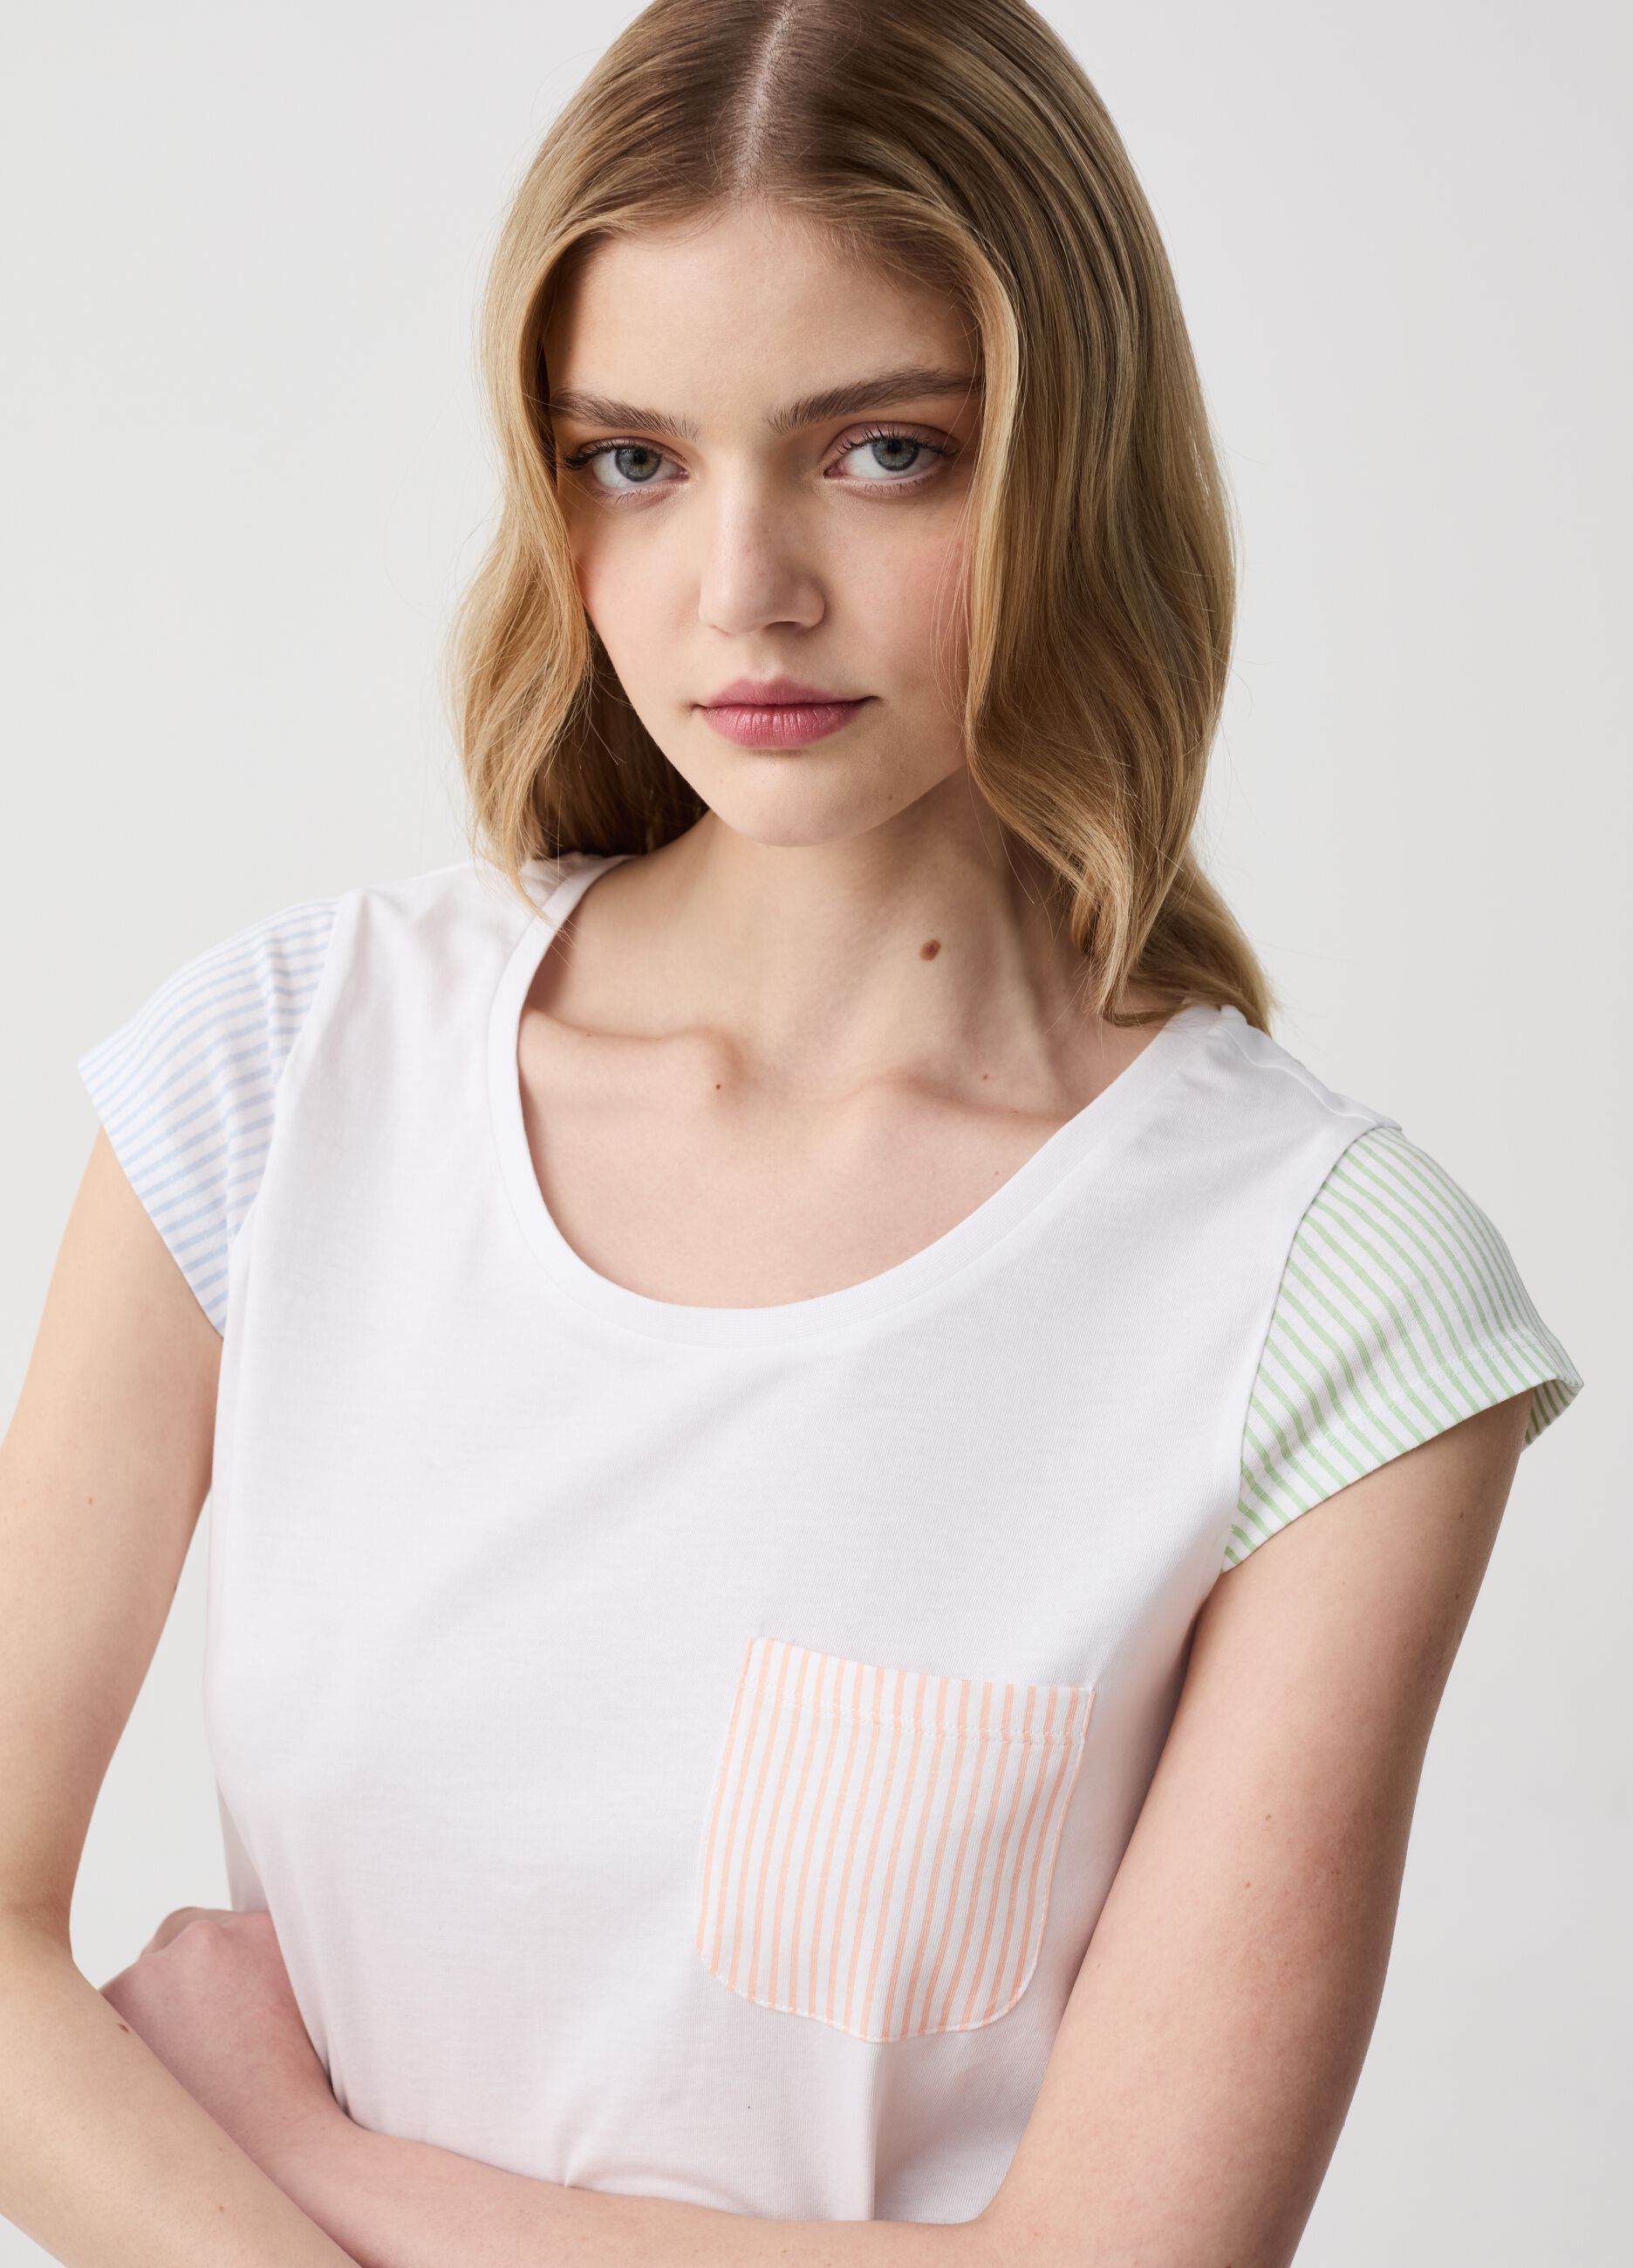 Pyjama top with sleeves and striped pocket